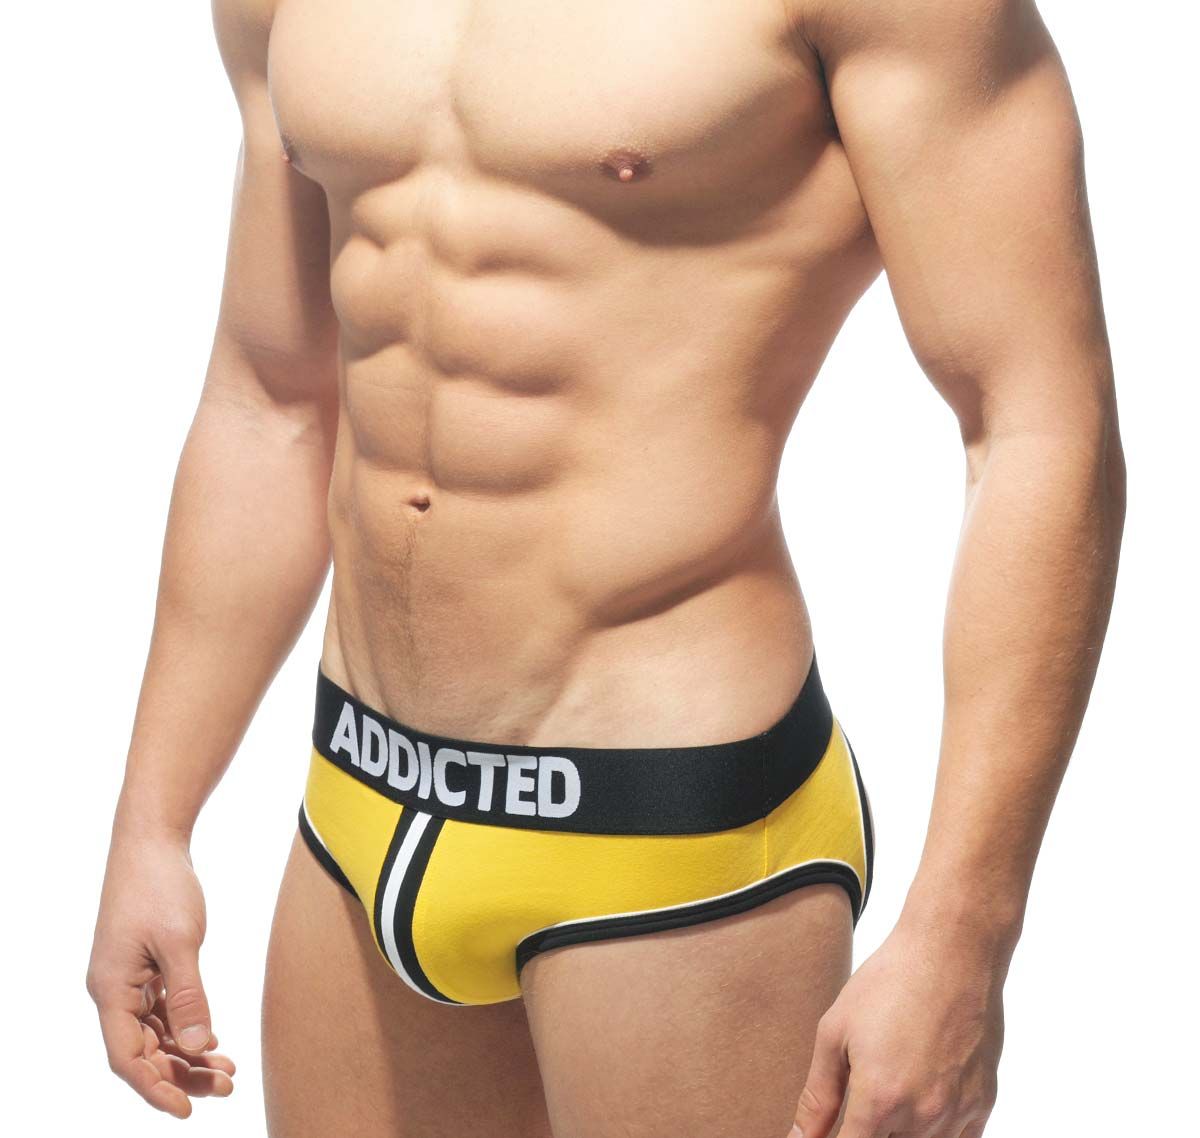 Addicted DOUBLE PIPING BOTTOMLESS BRIEF AD305, gelb